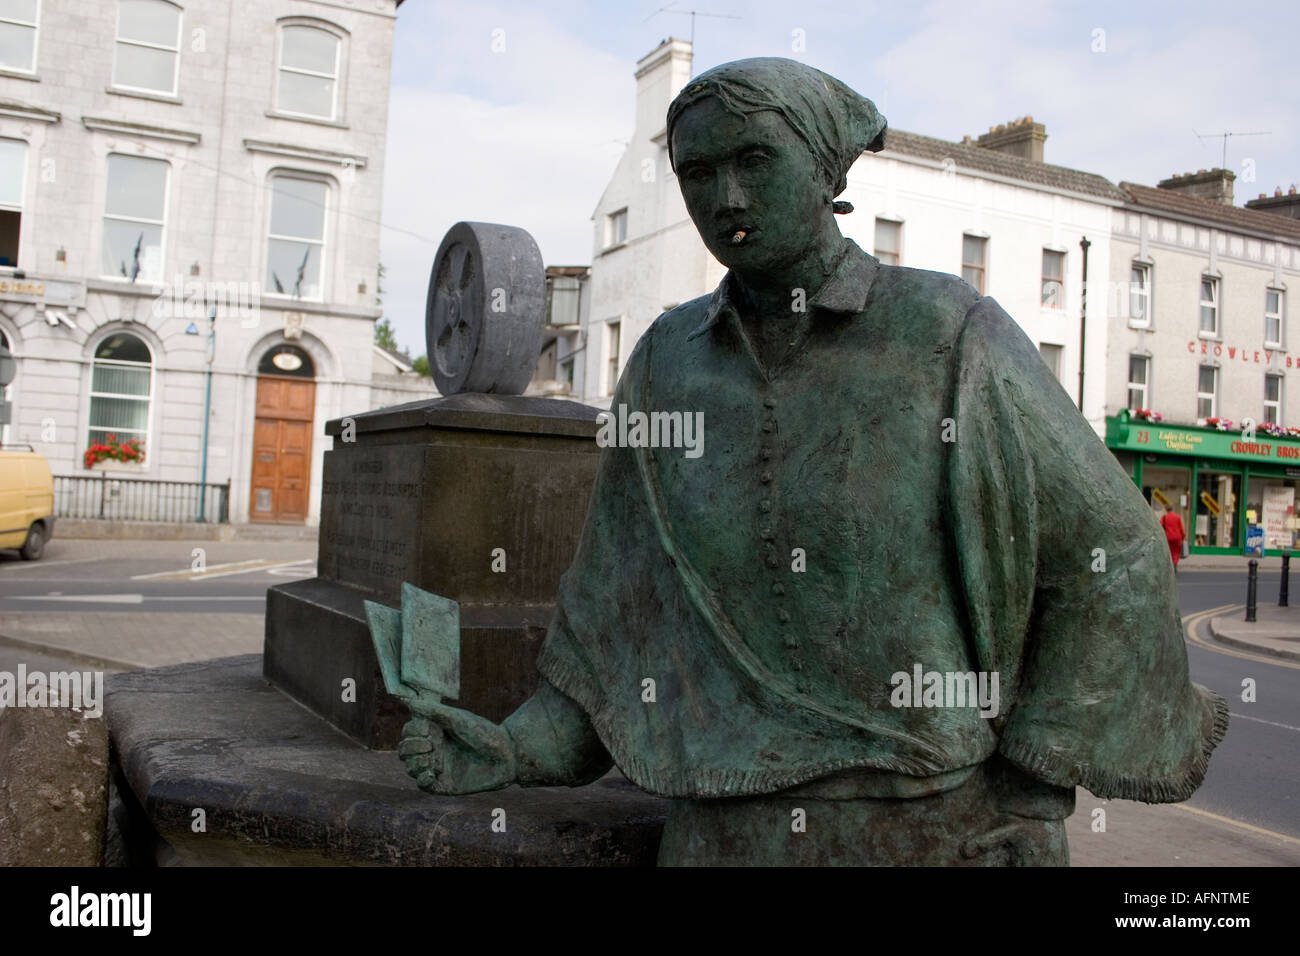 defaced bronze Statue of female Irish farm worker with cigarette in mouth Stock Photo